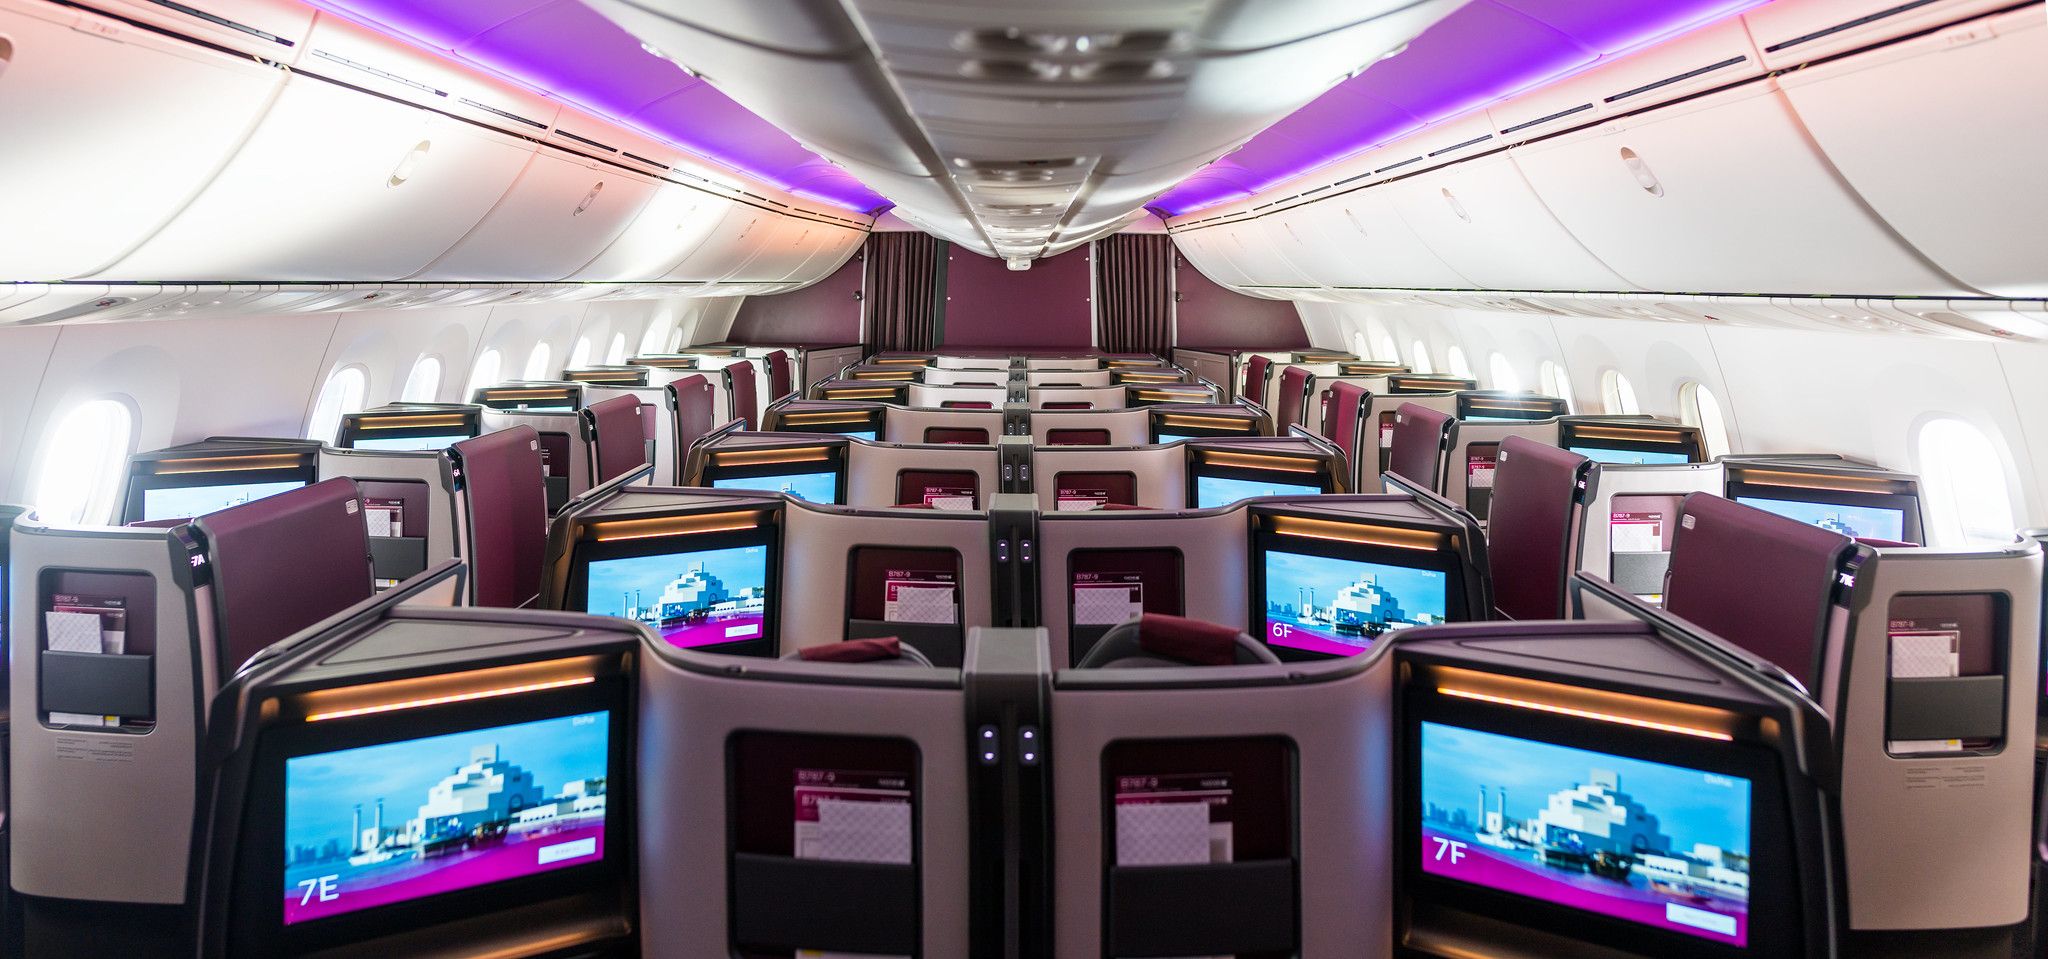 A panoramic view of the business class QSuite cabin on Qatar Airways Airbus A350.